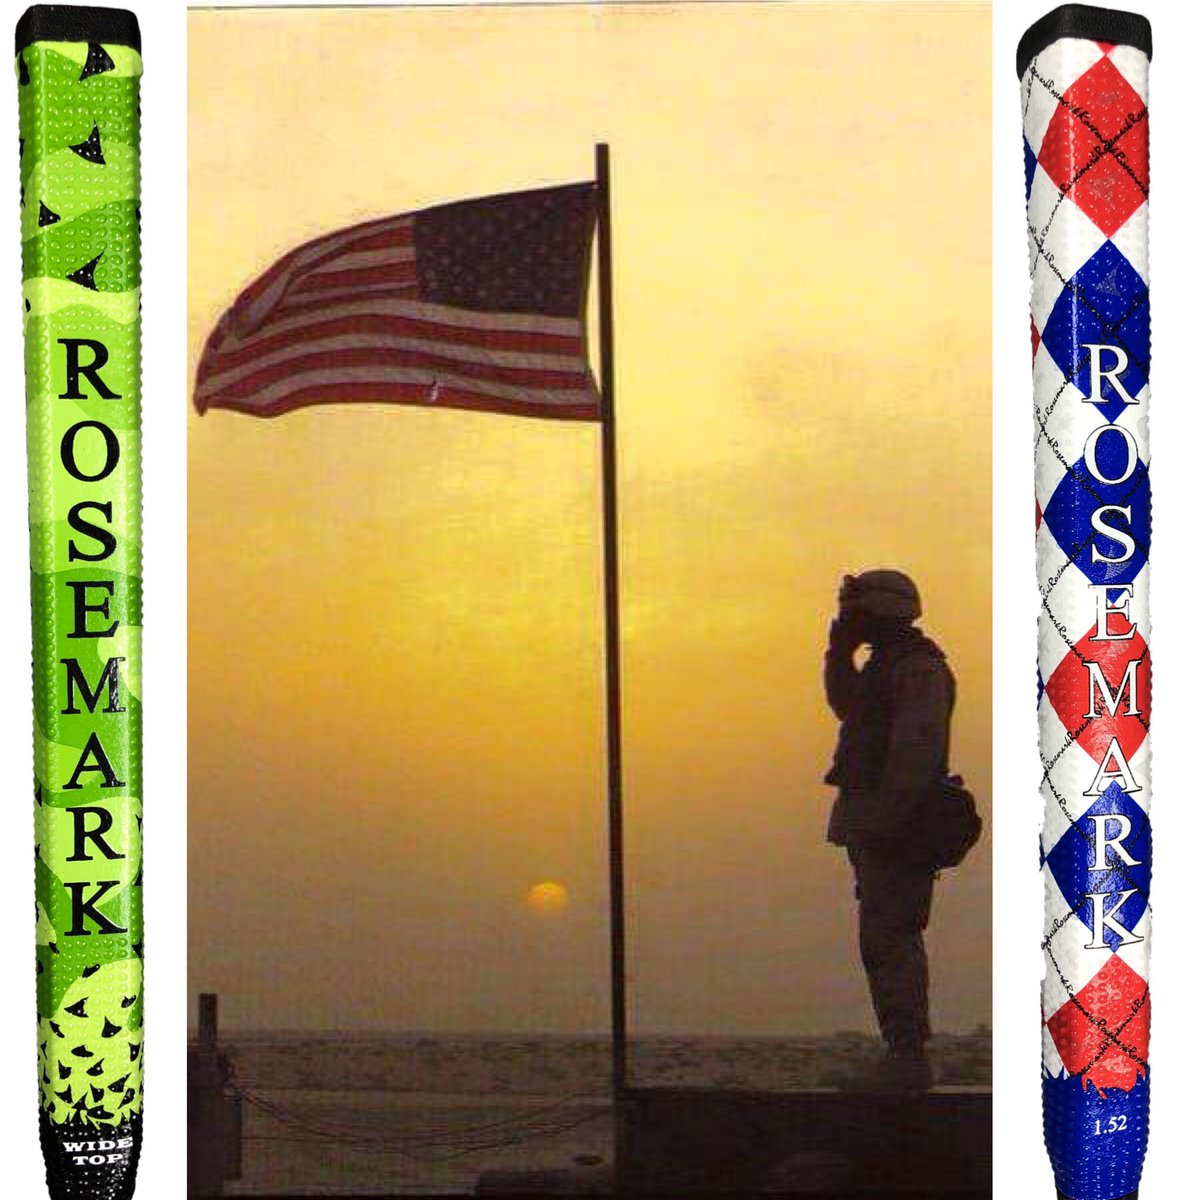 Thank you to all our brave men and women who have kept us free and safe. Bless you all.